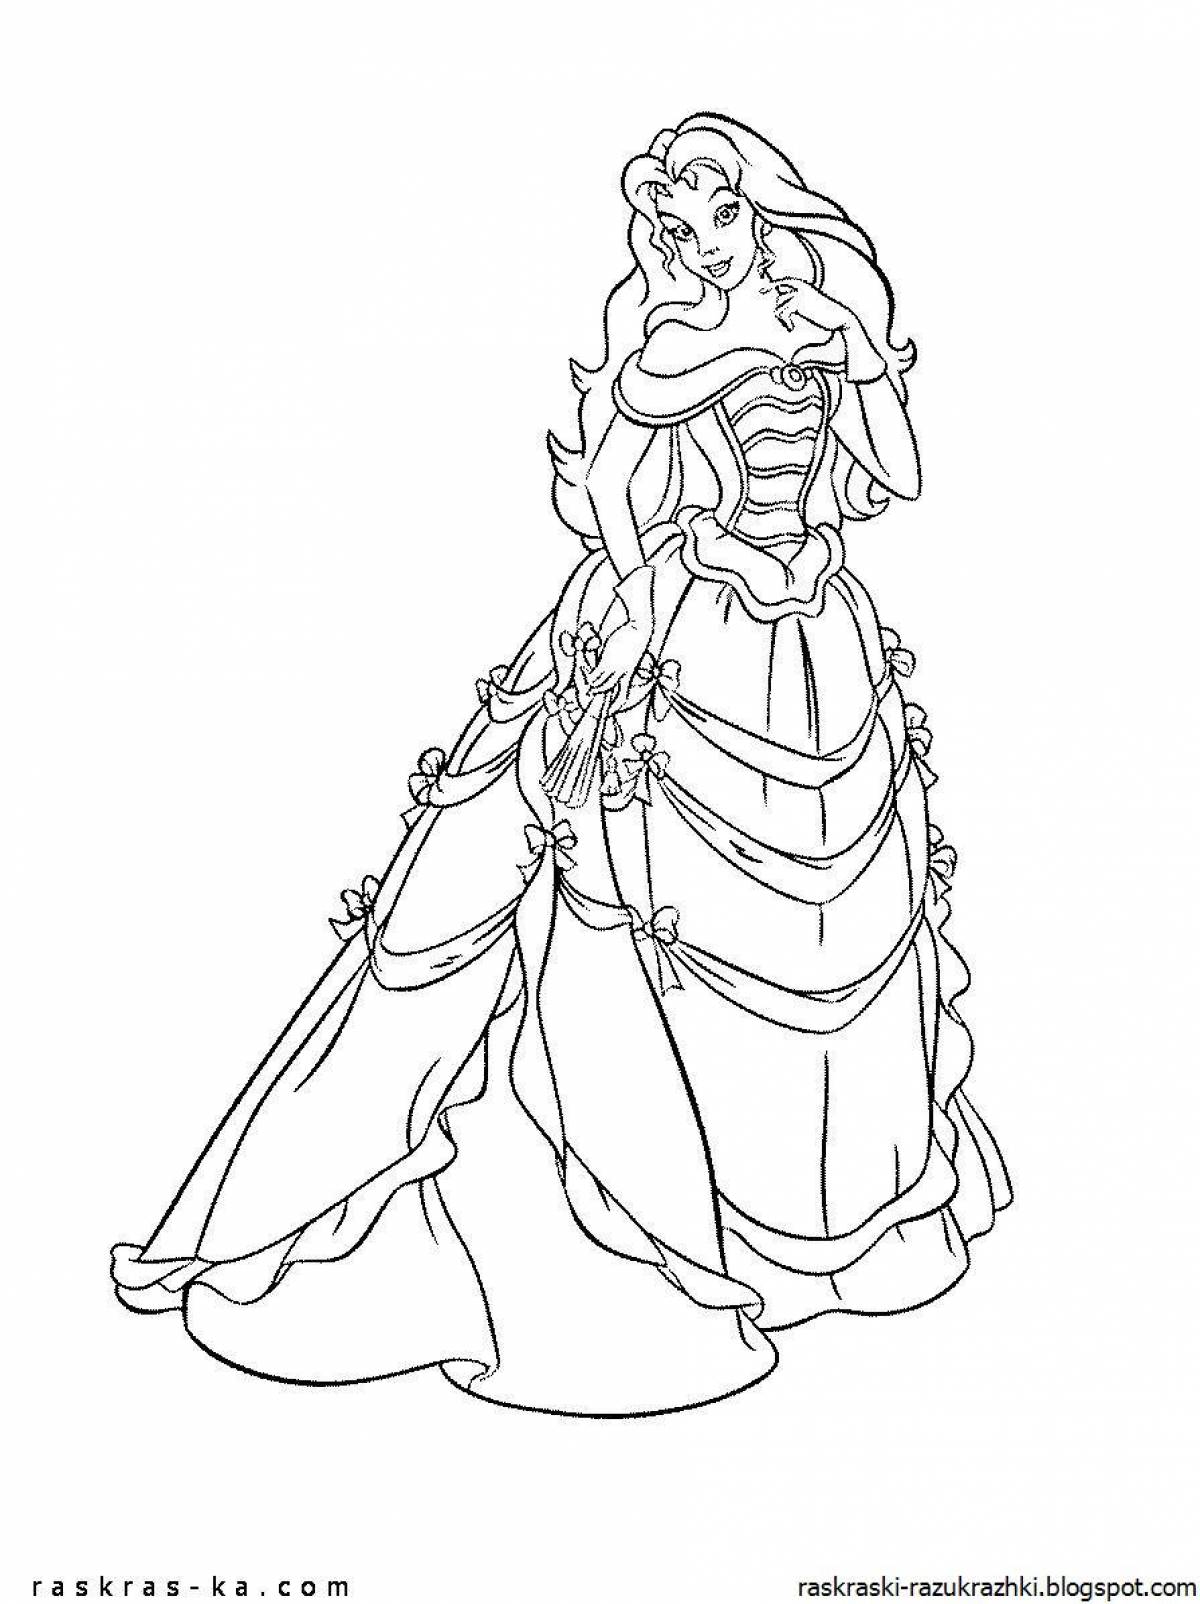 Amazing coloring pages of princesses in beautiful dresses